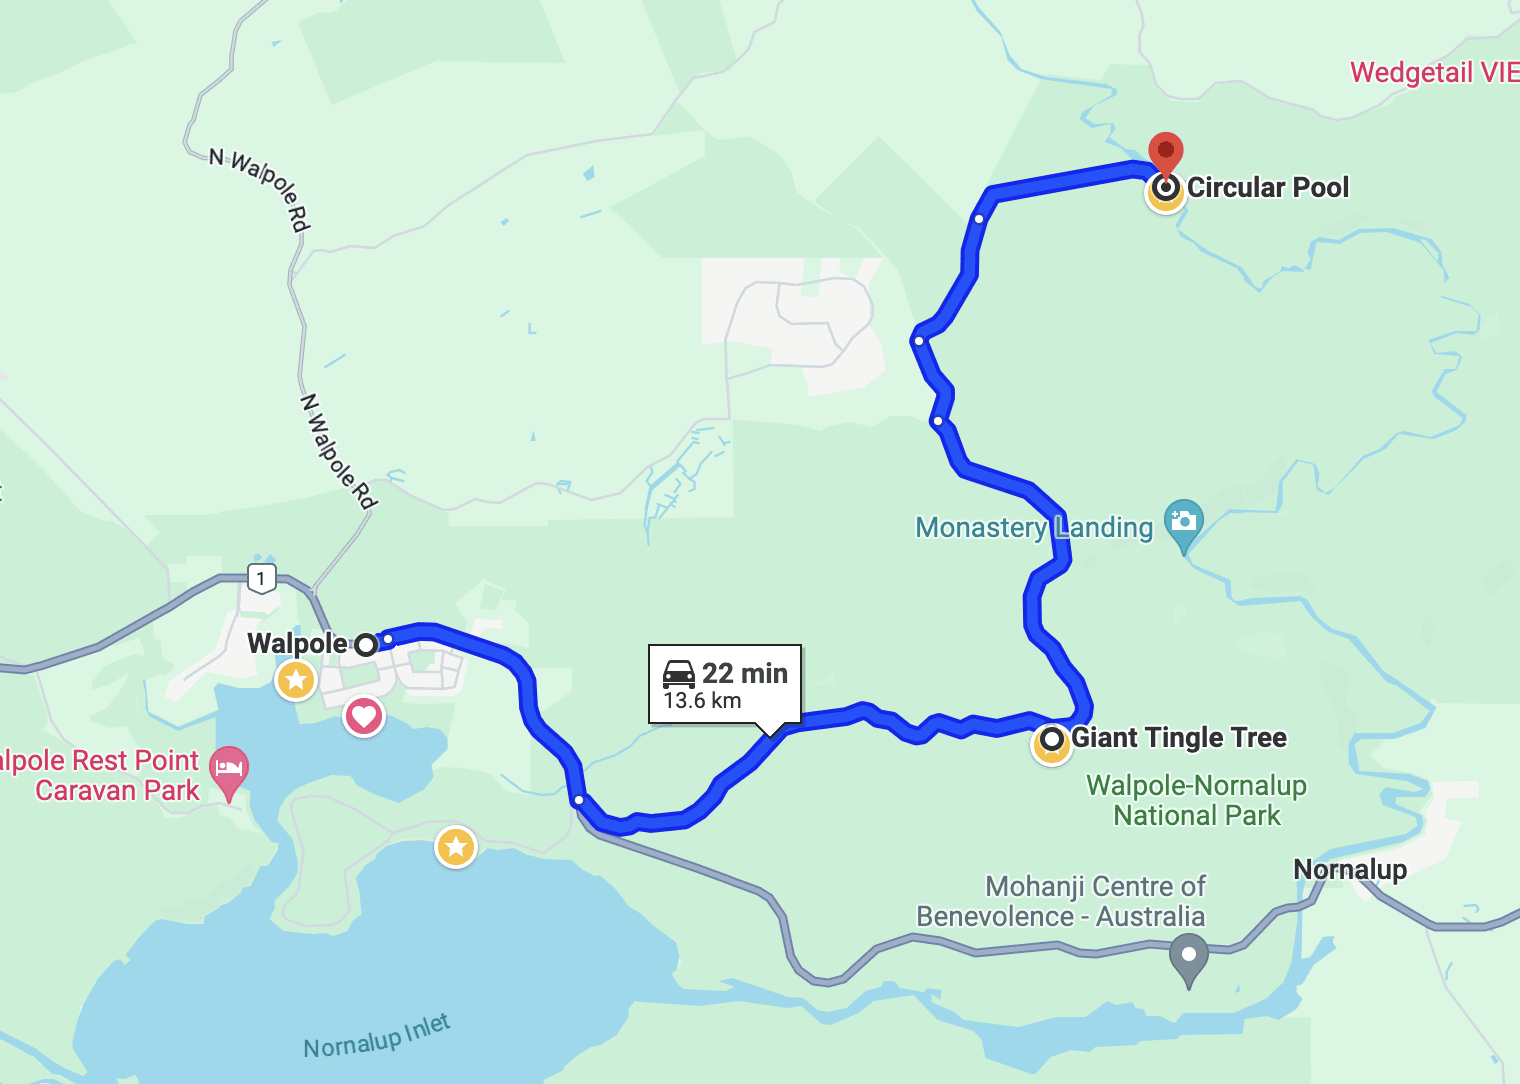 Route to Circular Pool from Walpole - 22 minute drive and 13.6 km via Hilltop road